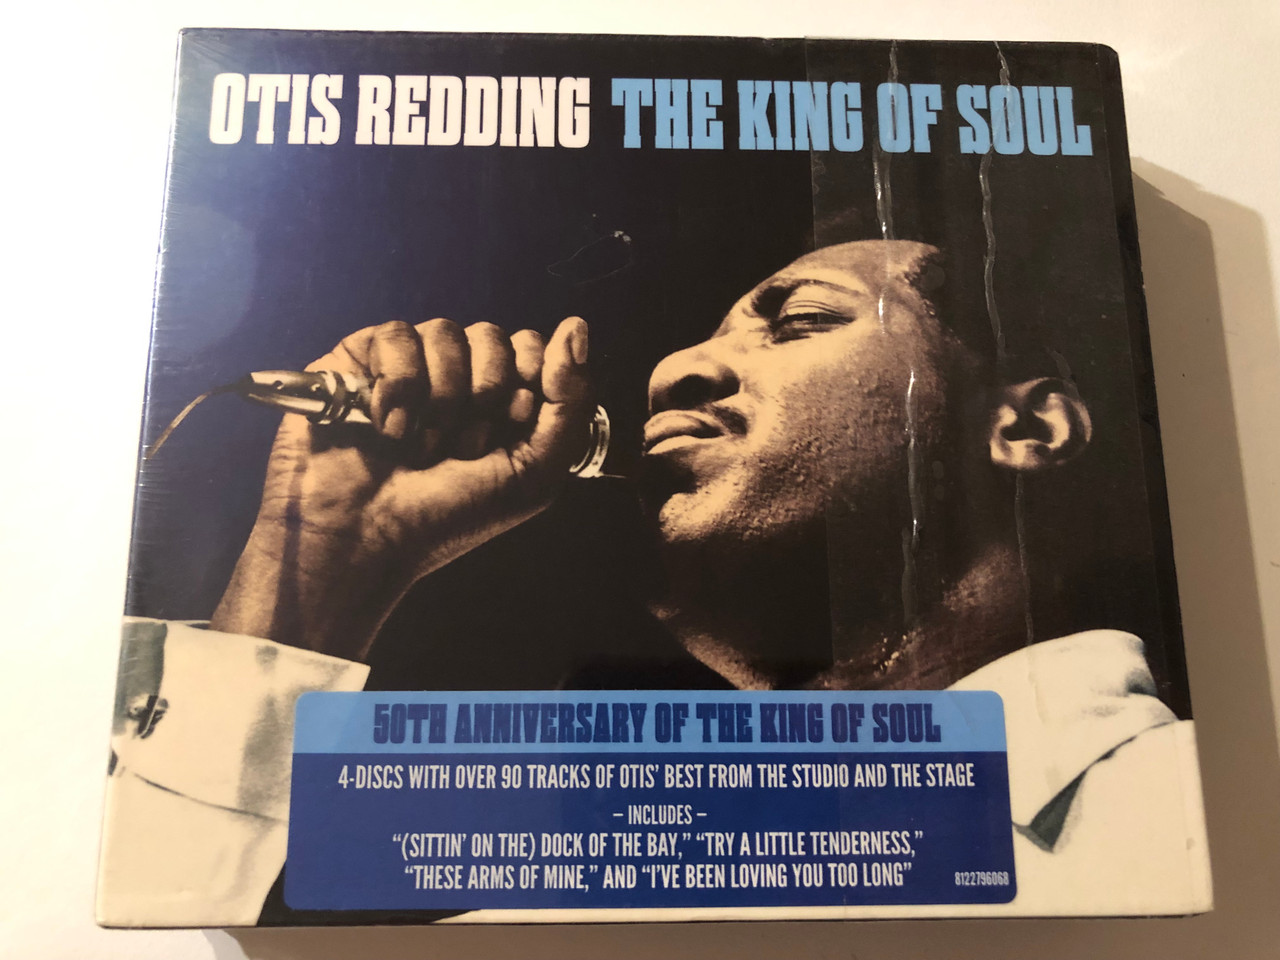 https://cdn10.bigcommerce.com/s-62bdpkt7pb/products/0/images/276189/Otis_Redding_The_King_Of_Soul_50th_Anniversary_Of_The_King_Of_Soul_4-Discs_With_Over_90_Tracks_Of_Otis_Best_From_The_Studio_And_The_Stage._Includes_Sittin_On_The_Dock_Of_The_Bay_1__82965.1686243127.1280.1280.JPG?c=2&_gl=1*imys6c*_ga*MjA2NTIxMjE2MC4xNTkwNTEyNTMy*_ga_WS2VZYPC6G*MTY4NjIzOTQ0OS45MzMuMS4xNjg2MjQyODAzLjM0LjAuMA..